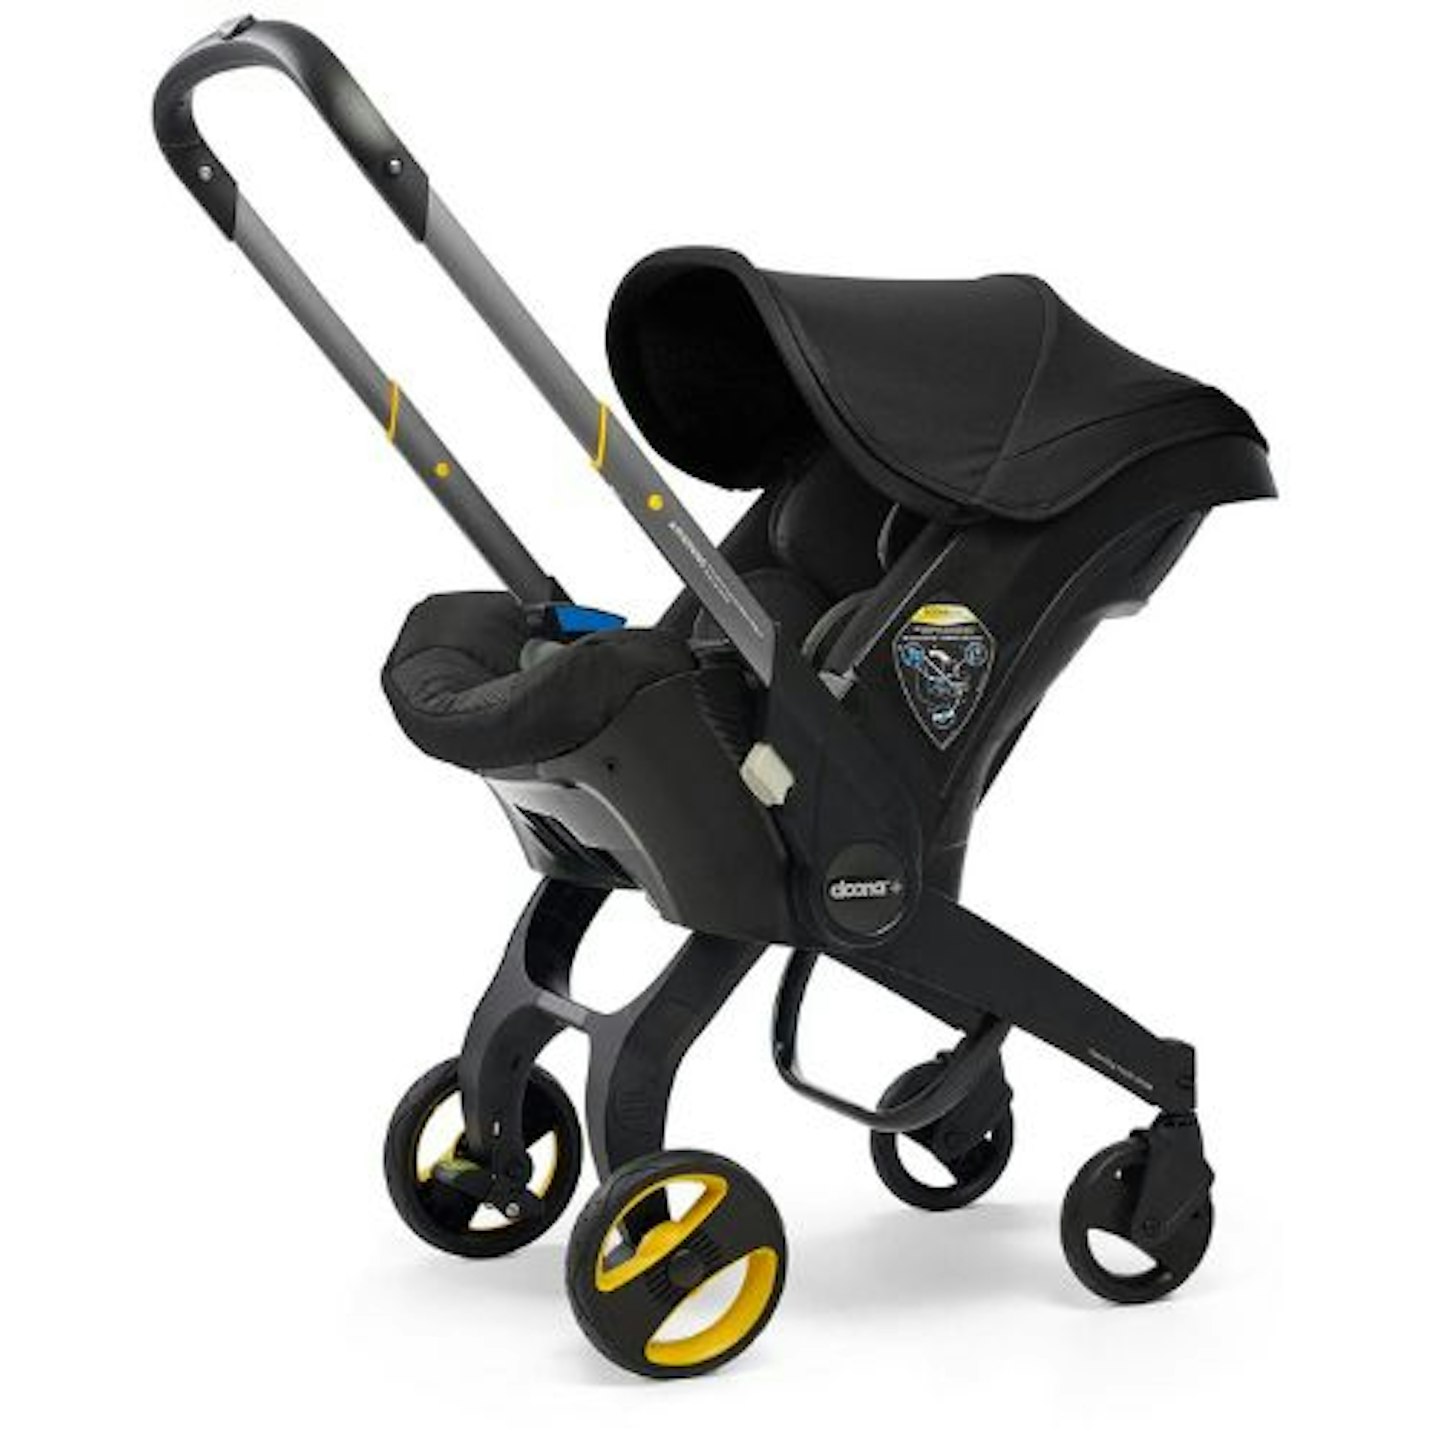 Parent-facing strollers and pushchairs